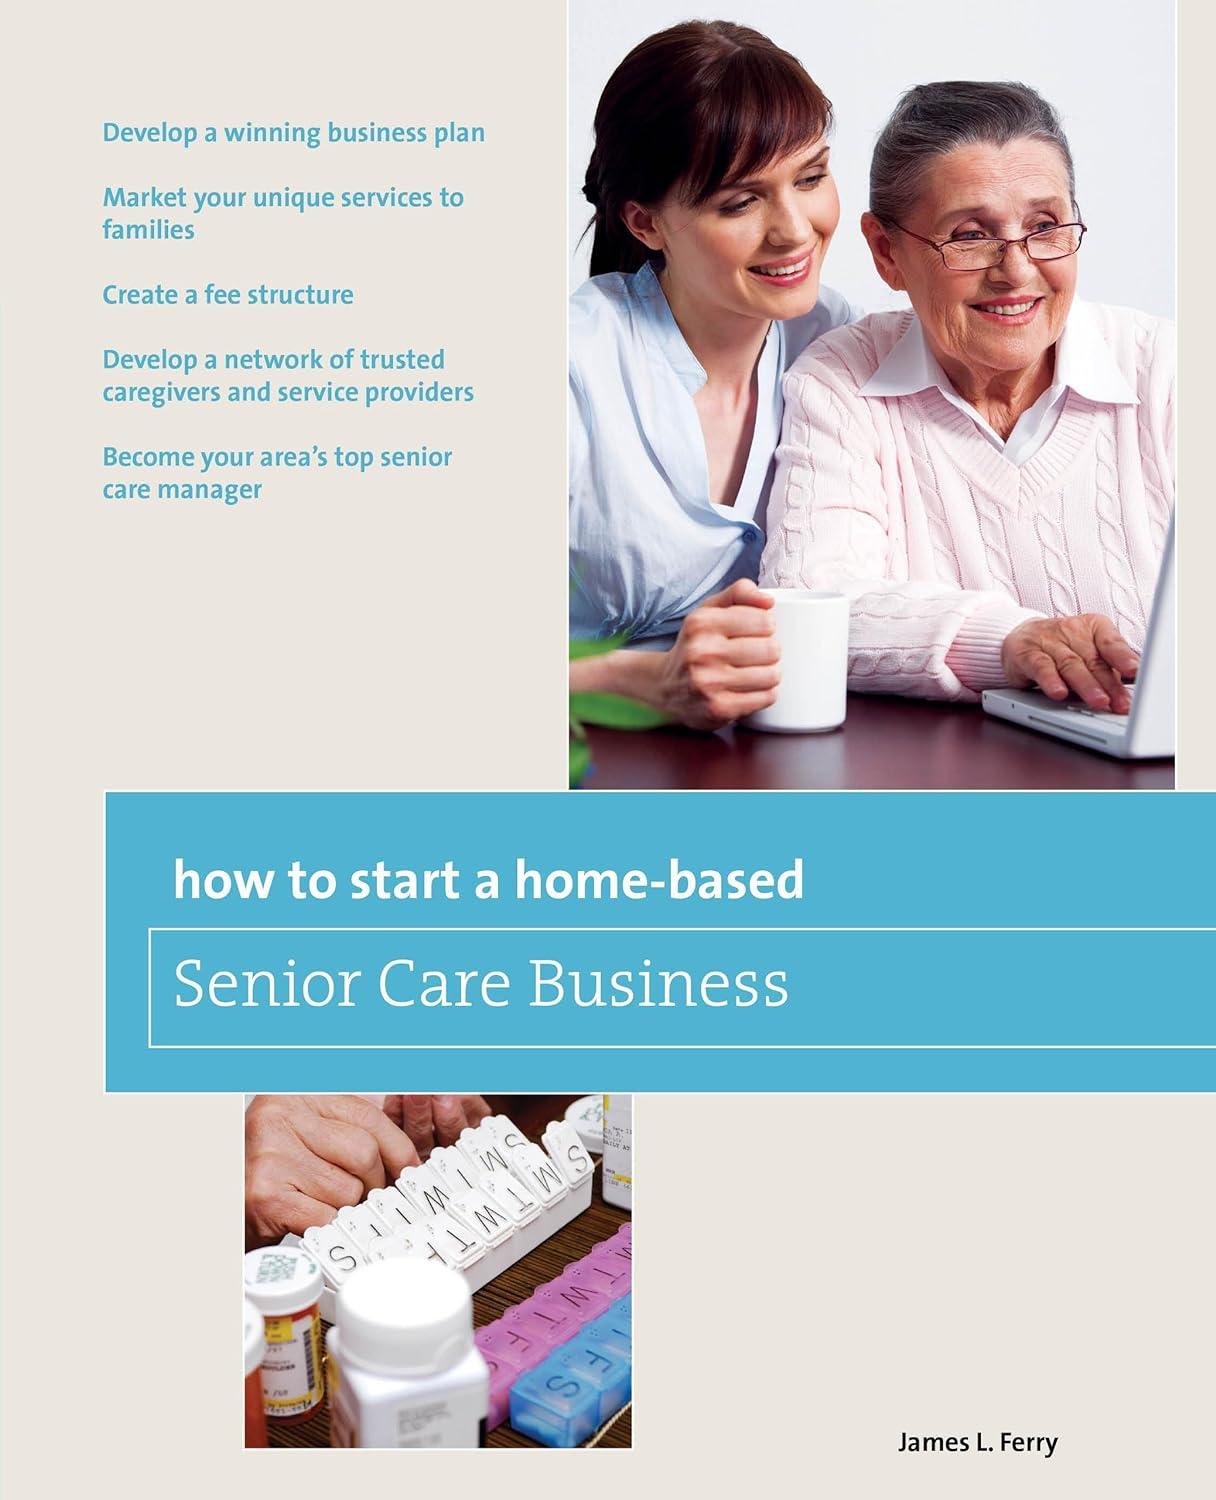 How To Start A Home Based Senior Care Business Develop A Winning Business Plan Market Your Unique Services To Families Create A Fee Structure Care Manager